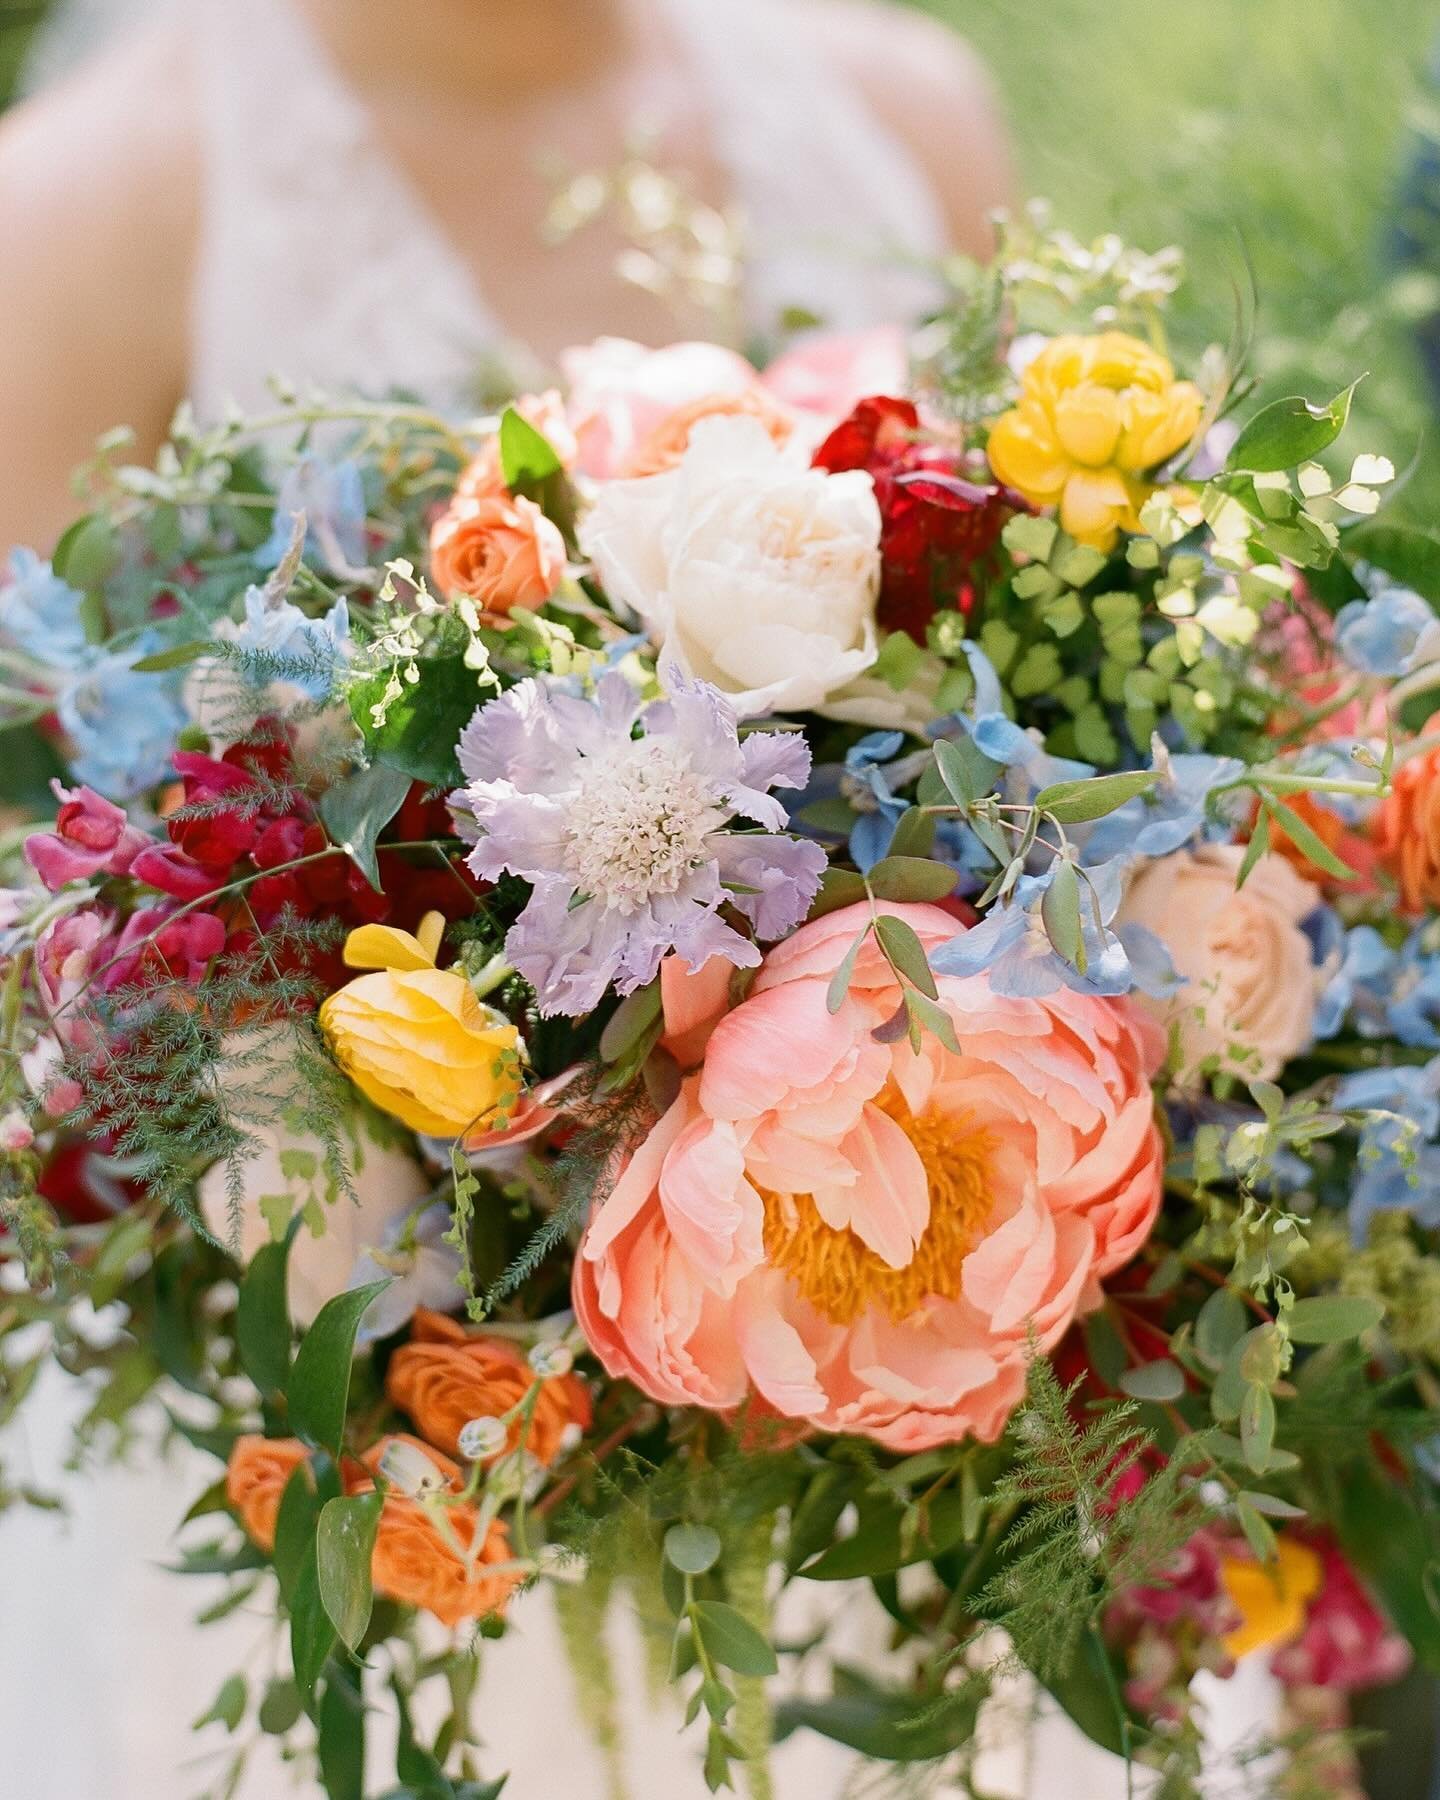 This bouquet is May. We cannot wait for more vibrant bouquets! As the months heat up, so do the color palettes and we are so here for it! 

Photo: @annashackleford 
Floral + Decor: @adedesignstudio
Catering + Service: @a_divine_event
Venue: @littlega